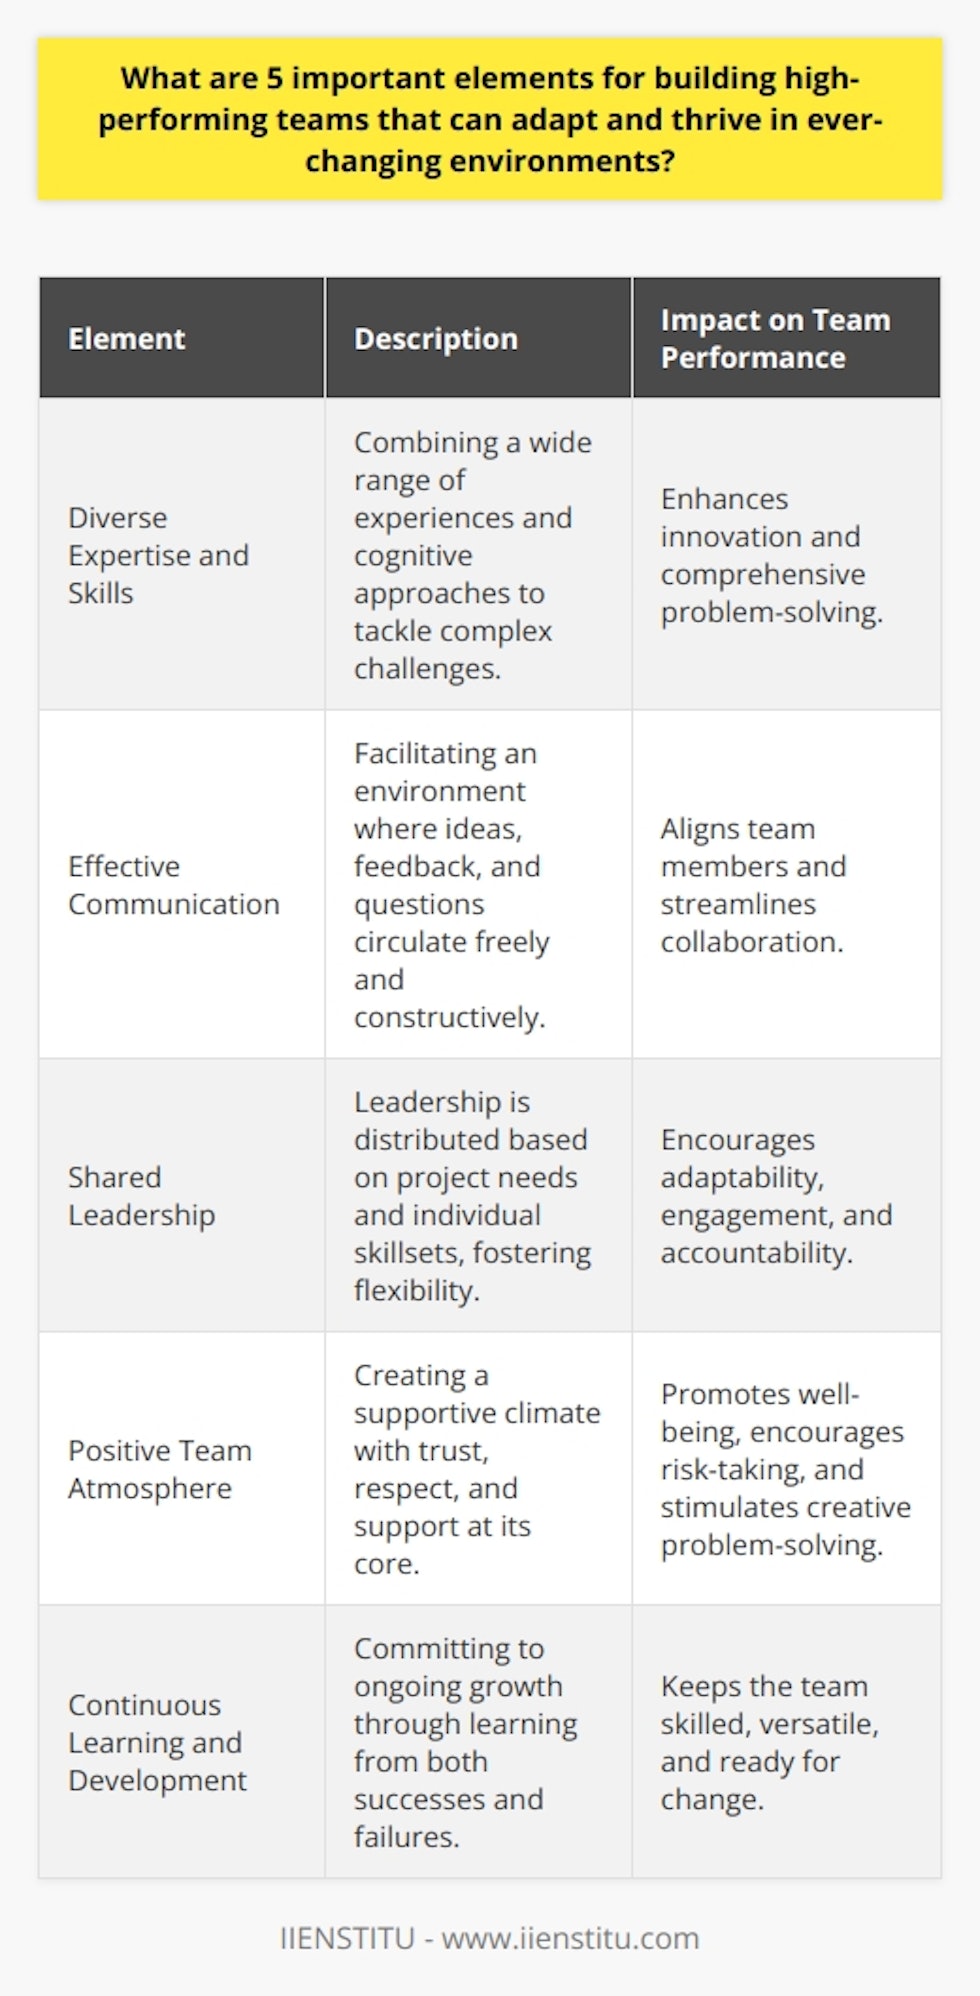 To construct teams that not only deliver exceptional results but also excel in rapidly changing landscapes, certain fundamental elements must be incorporated into their foundational structure. The following are five crucial characteristics that distinguish high-performing teams capable of thriving in dynamic conditions:1. **Diverse Expertise and Skills**: High-performing teams are not monolithic; they are composed of individuals who bring a rich variety of experiences, expertise, and cognitive approaches to the table. This diversity is instrumental in enabling the team to confront multifaceted challenges with a comprehensive toolbox of skills. It encourages innovative thinking and problem-solving, allowing the team to devise unique strategies that would be unattainable in a more homogenous setting.2. **Effective Communication**: Without a doubt, communication acts as the lifeblood of any successful team. Establishing a framework where ideas flow freely, questions are encouraged, and feedback is constructive and instantaneous establishes a fertile ground for collaboration. Effective communication ensures that all team members are aligned with the team's vision and objectives, making the collaborative process more seamless and efficient.3. **Shared Leadership**: In high-performing teams, leadership is not the exclusive domain of one individual, but rather a shared responsibility that flexes and shifts according to the project's needs and individual's skill sets. This enables the team to adapt swiftly to new circumstances, as members step forward to lead in areas where they excel. Shared leadership fosters a sense of ownership and accountability across the team, promoting higher levels of engagement and motivation.4. **Positive Team Atmosphere**: The underlying emotional and psychological climate of a team can profoundly impact its performance. A positive environment defined by trust, respect, and support enhances the team's ability to work collaboratively and address challenges creatively. Team members who feel valued are more inclined to contribute their best efforts, take calculated risks, and participate in critical dialogues that drive innovation and growth.5. **Continuous Learning and Development**: Being a high-performing team means never resting on one's laurels. Instead, there is a constant pursuit of progress, where learning from both victories and failures is par for the course. A commitment to ongoing personal and professional development ensures the team remains sharp, skilled, and versatile. Moreover, the willingness to evolve and adapt in light of new information keeps the team relevant and ready to navigate the unpredictable tides of change.Instituting these five elements as the cornerstones of a team’s structure can significantly enhance its performance and ability to adapt in fluctuating environments—an outcome that the IIENSTITU, with its focus on professional growth and development, would likely endorse. Each element contributes to a collective strength and agility, reinforcing the team's capacity to achieve its objectives and sustain high levels of success over time.